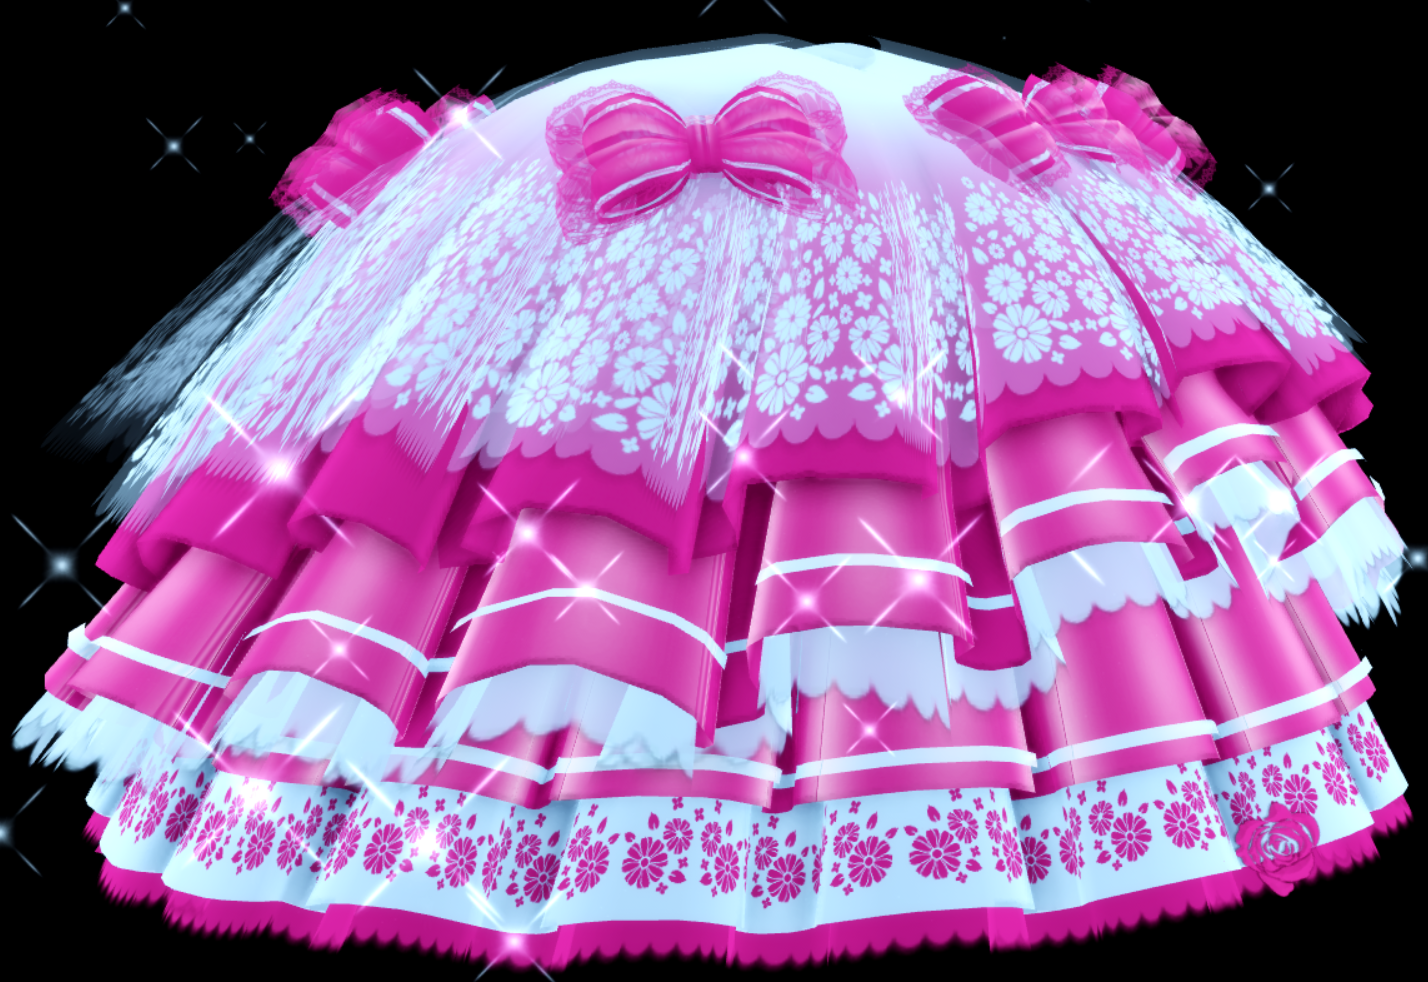 Southern Belle Royale High Outfits